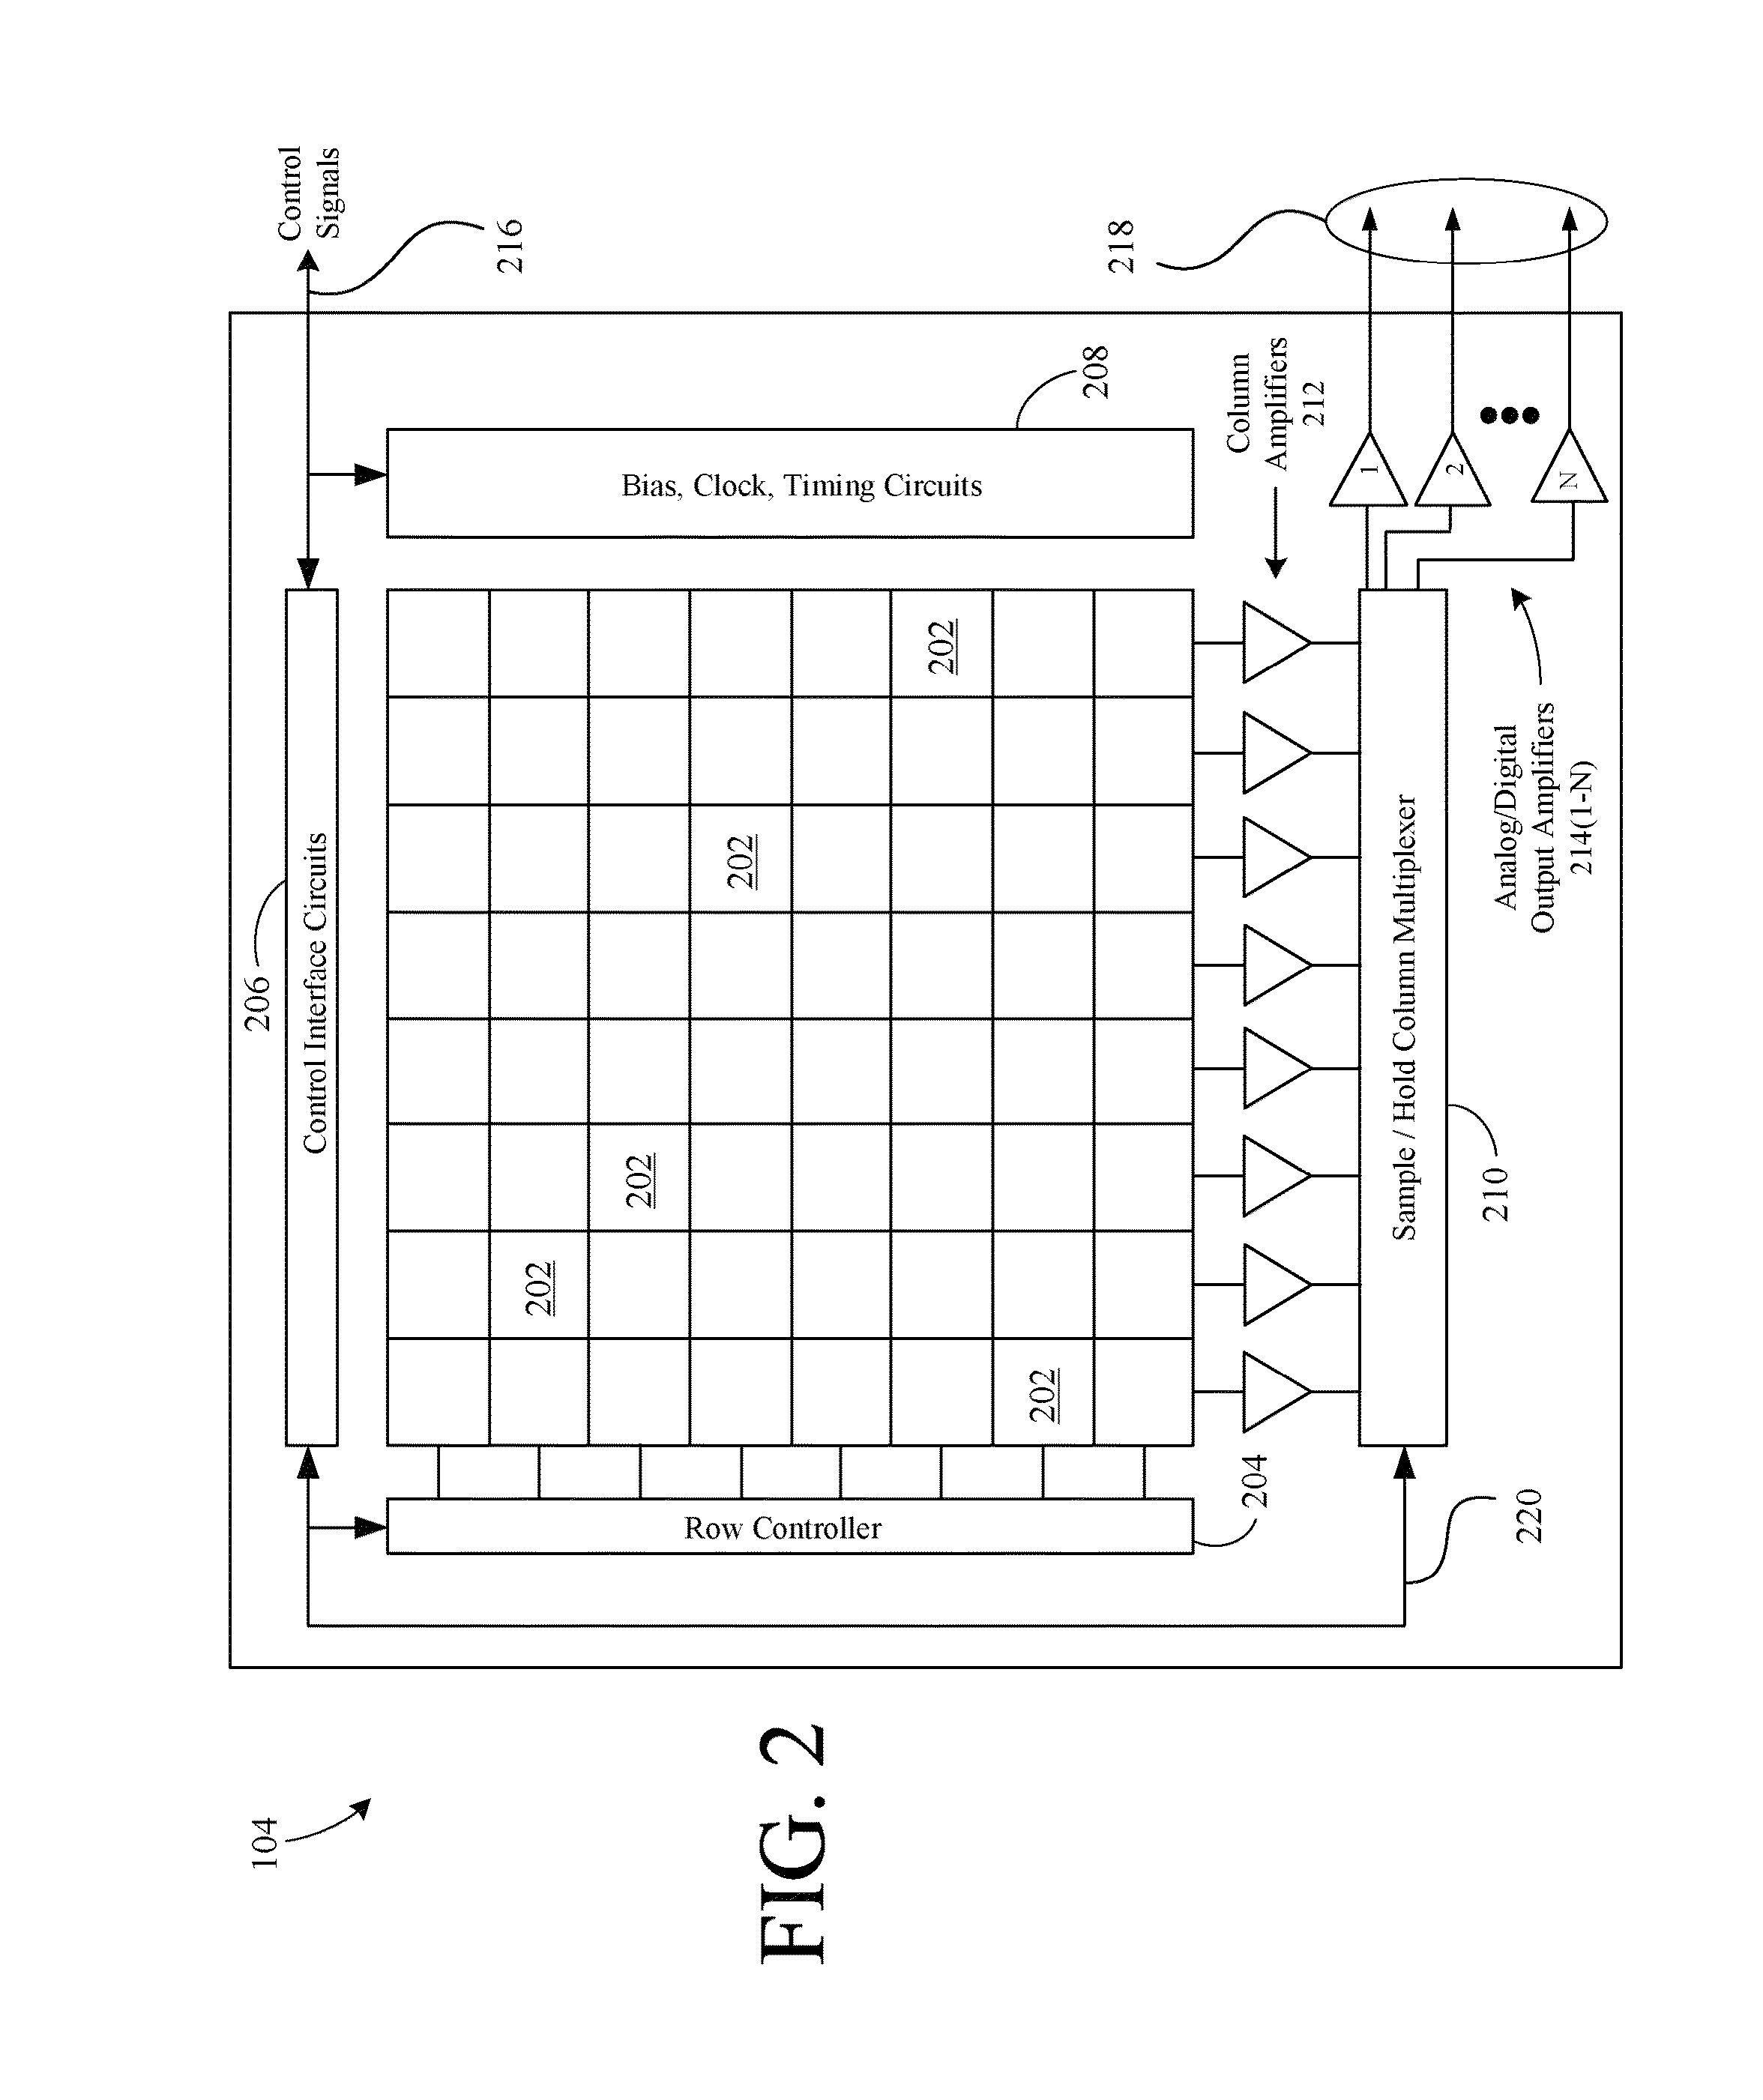 System and method for using filtering and pixel correlation to increase sensitivity in image sensors